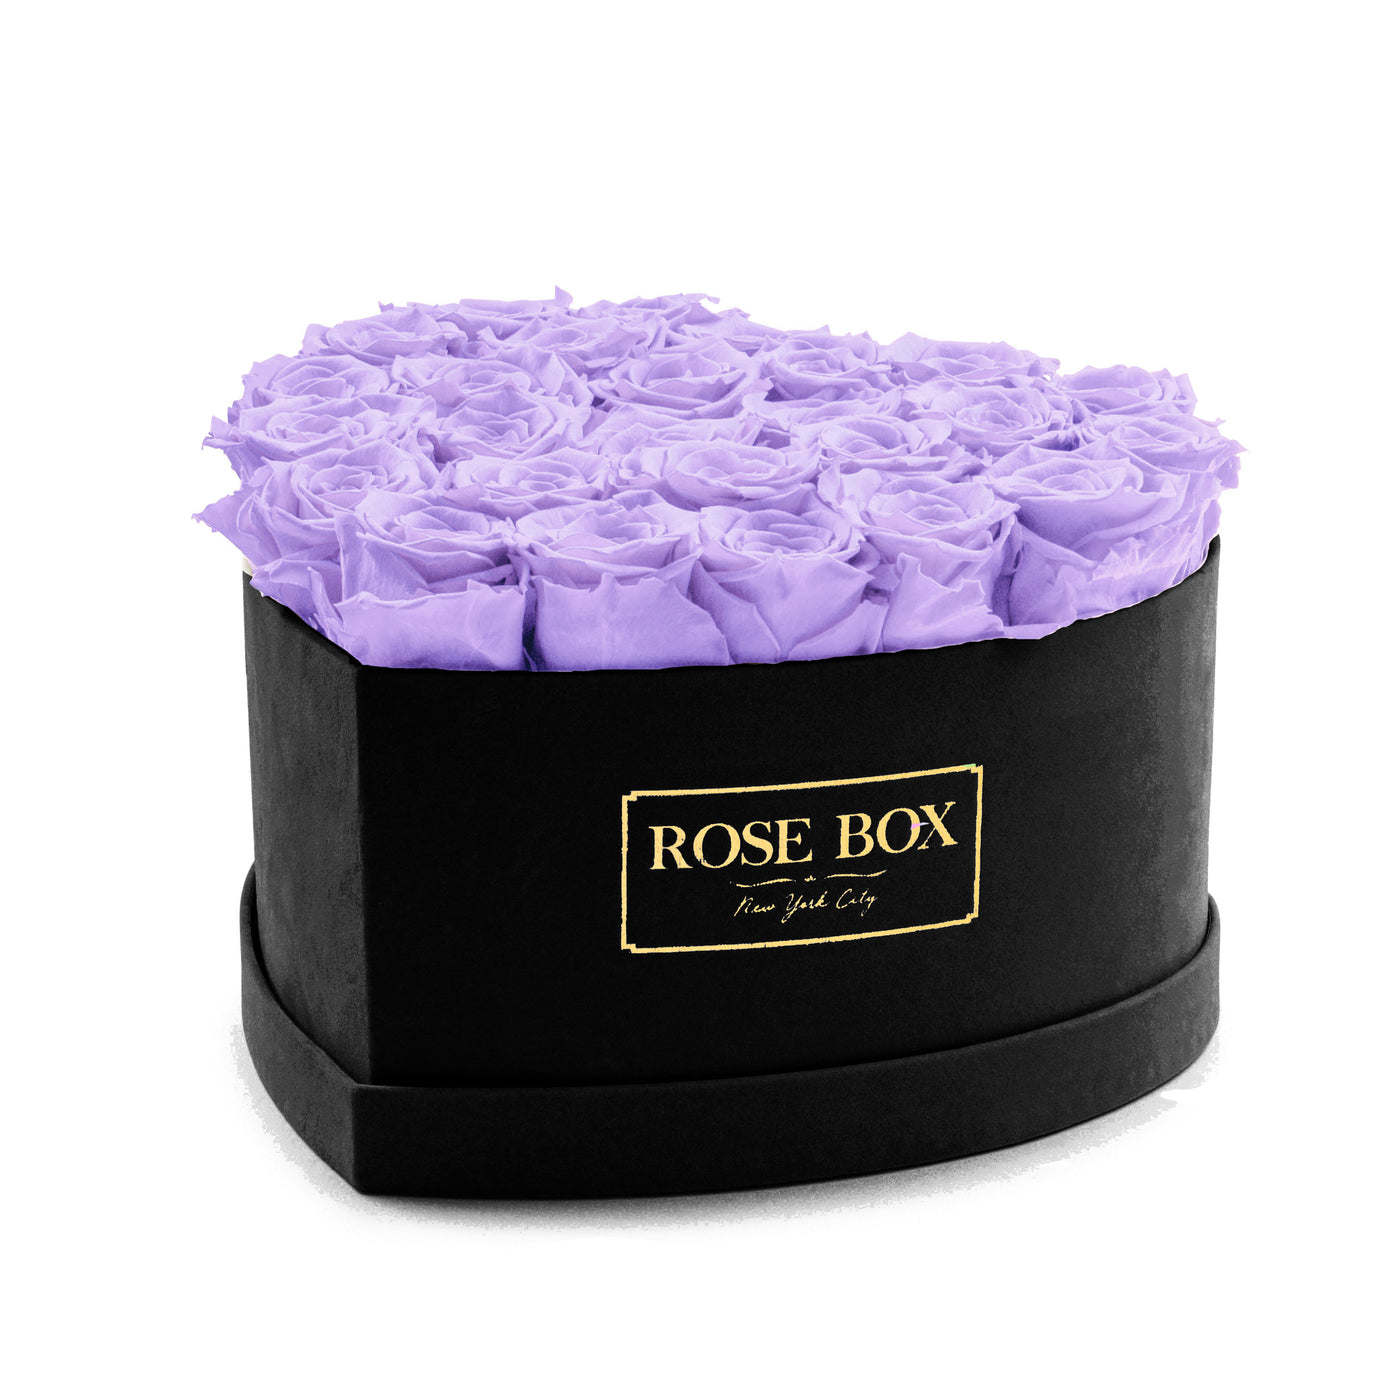 Large Black Heart Box with Lavender Roses